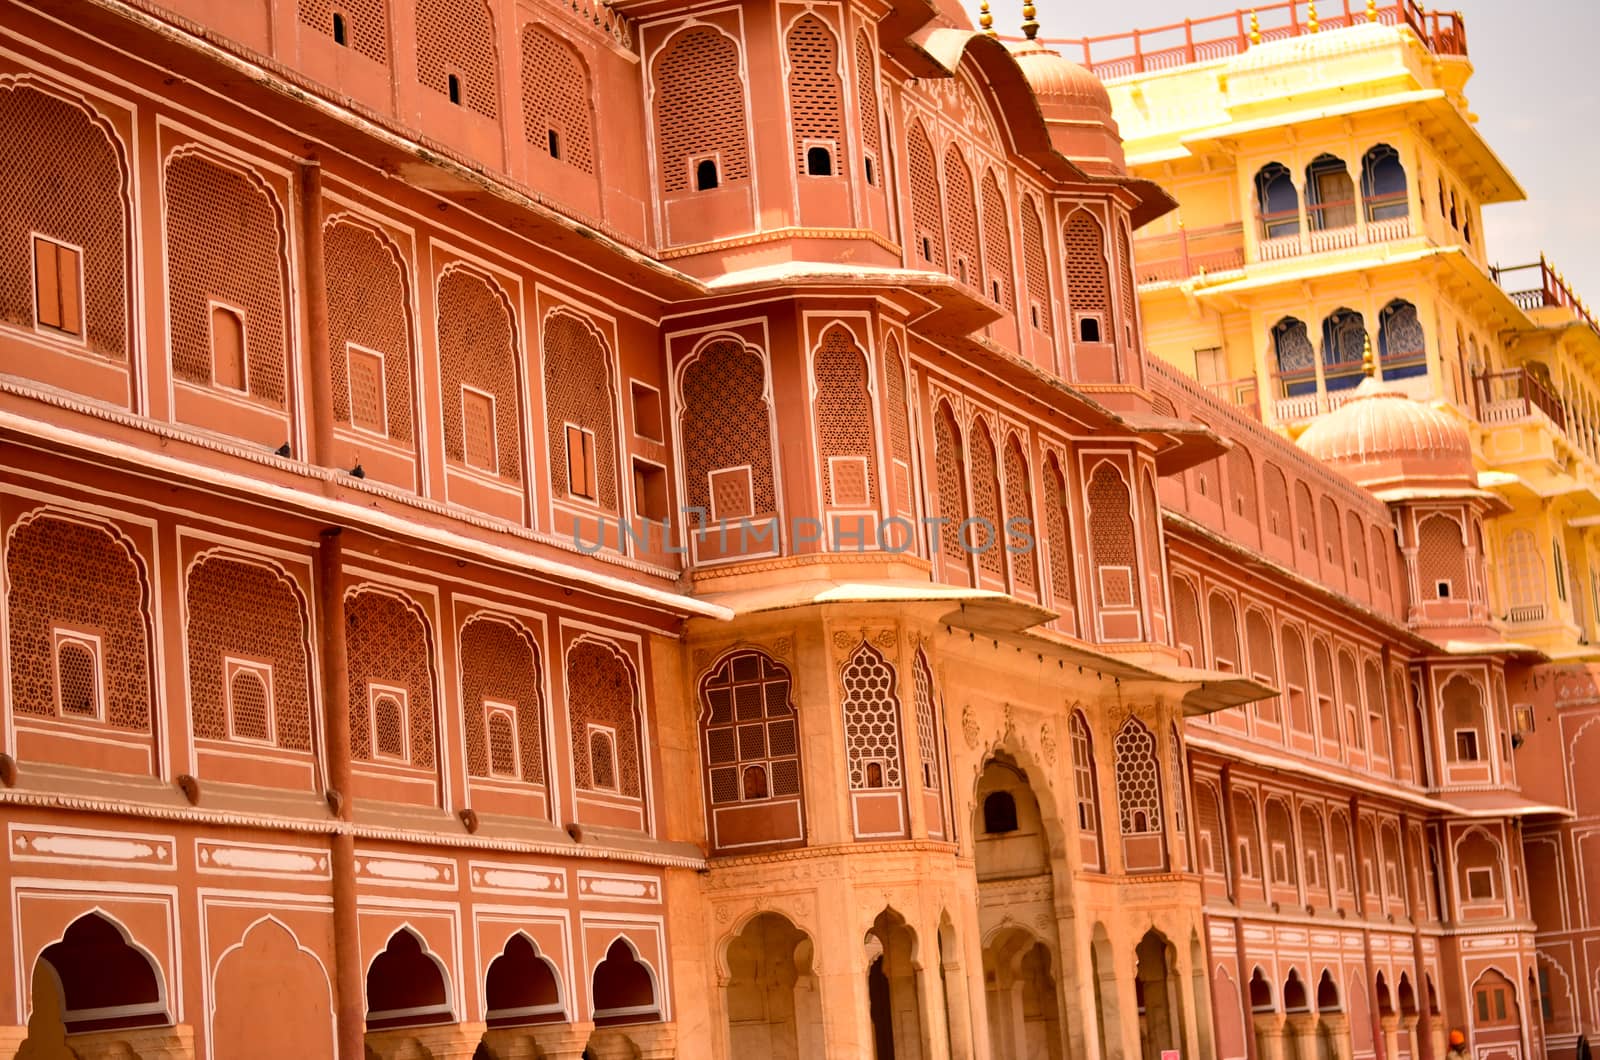 Wall section of City Palace, which includes the Chandra Mahal and Mubarak Mahal palaces and other buildings, is a palace complex in Jaipur, the capital of the Rajasthan, India. by jayantbahel